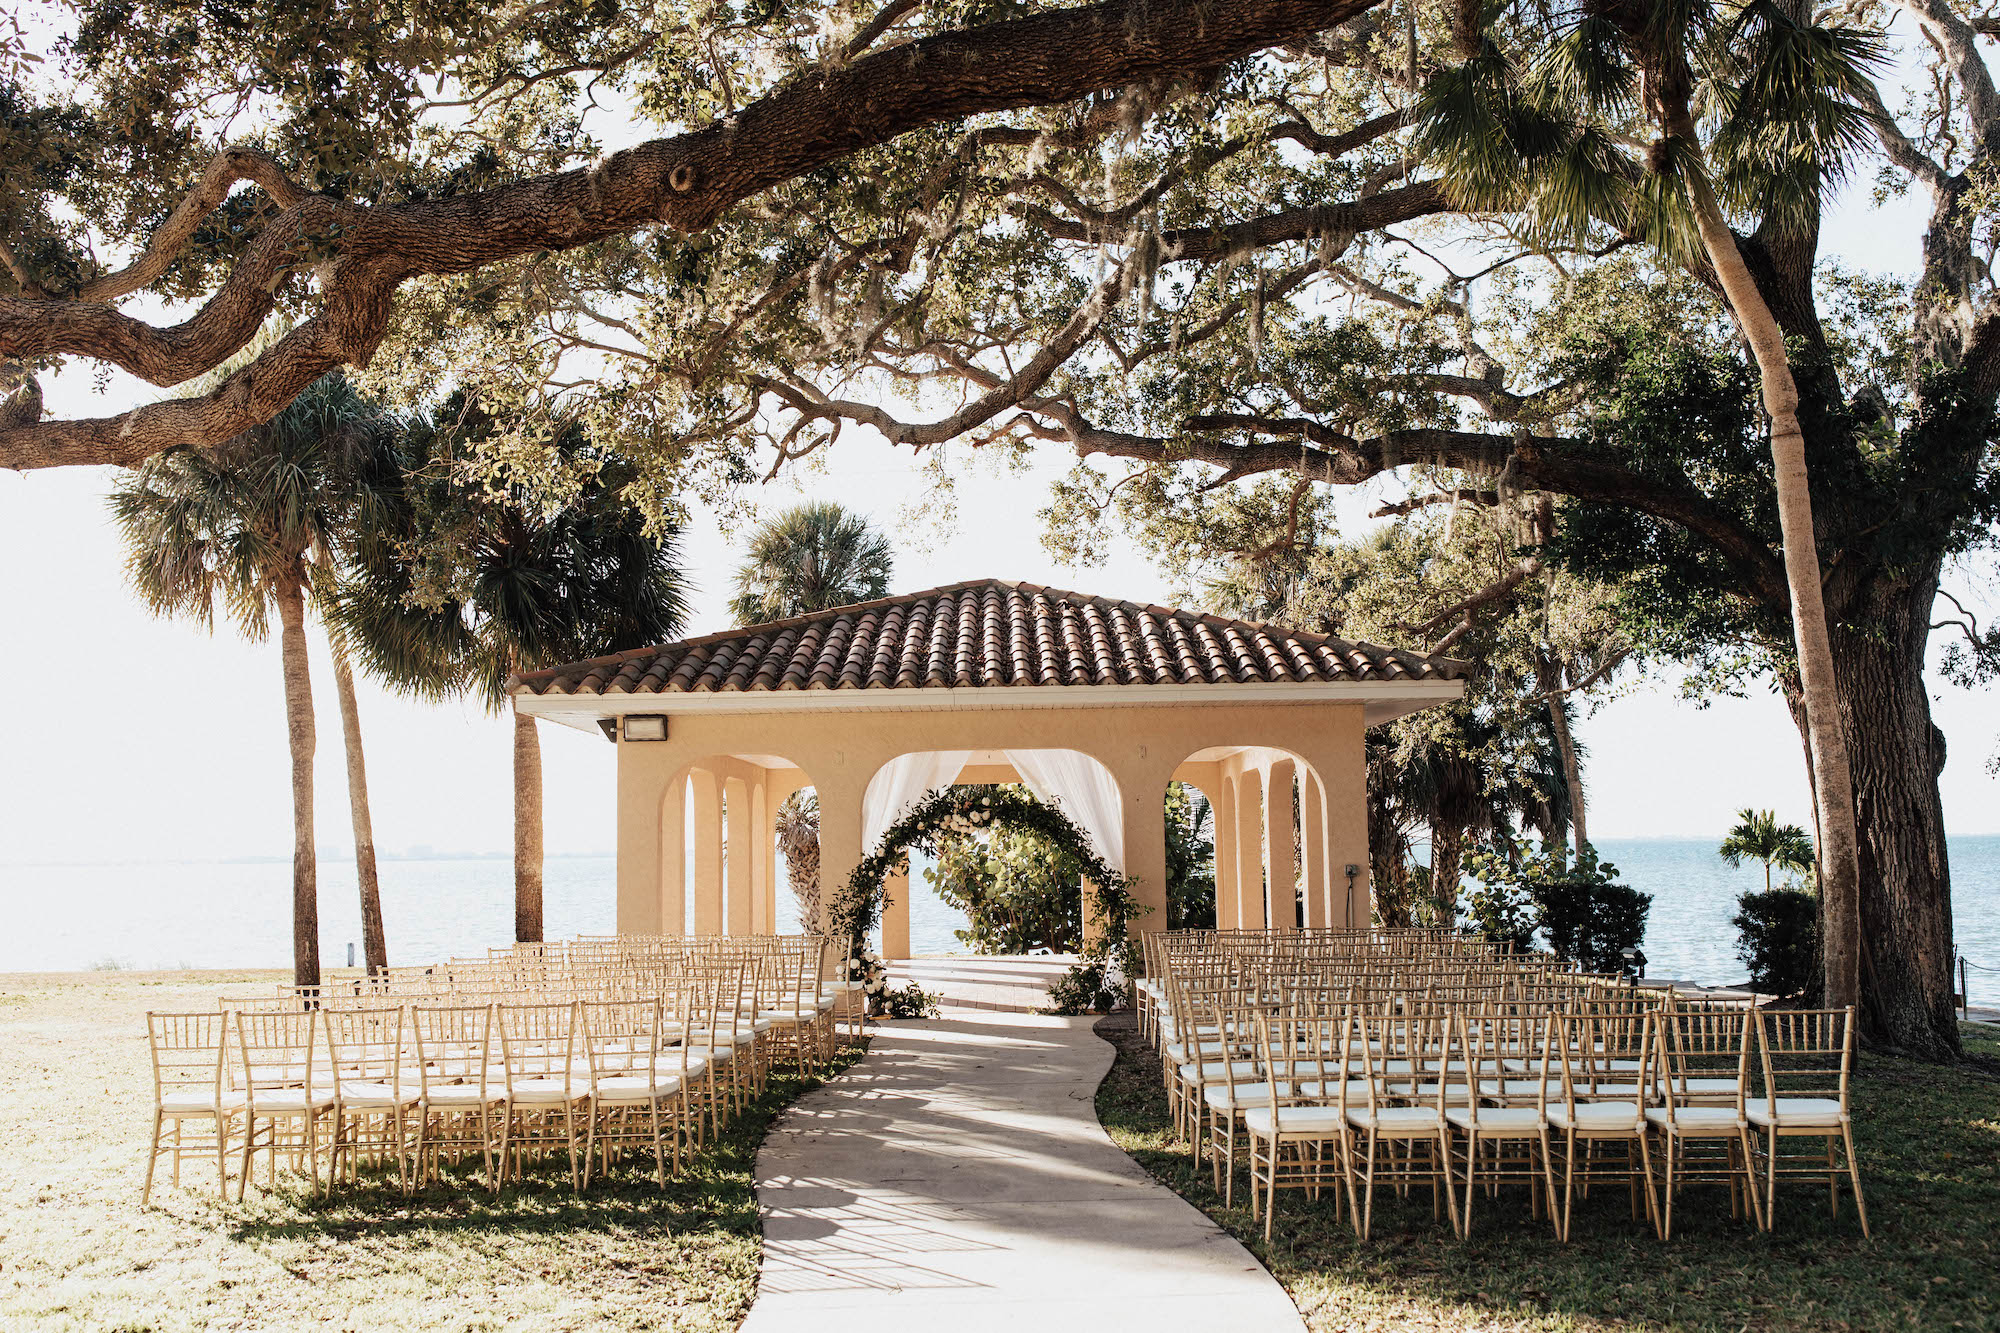 Classic Elegant Outdoor Wedding Ceremony with Circle Arch with Greenery Details | Sarasota Wedding Planner Taylored Affairs | Venue Powel Crosley